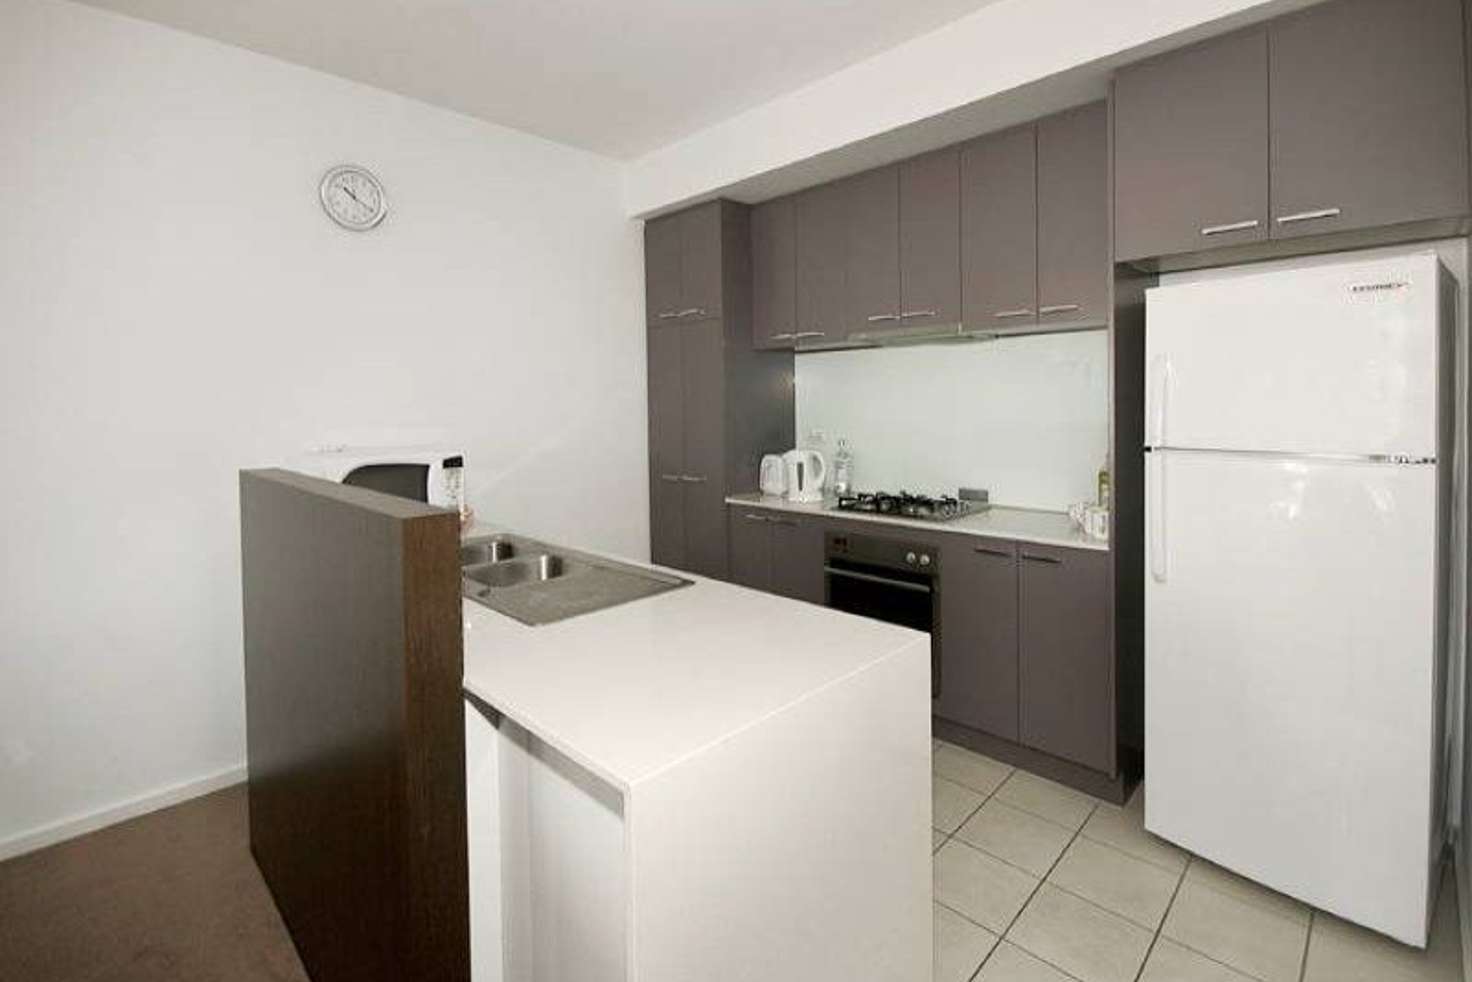 Main view of Homely apartment listing, 24/2-4 Blair Road, Glen Waverley VIC 3150